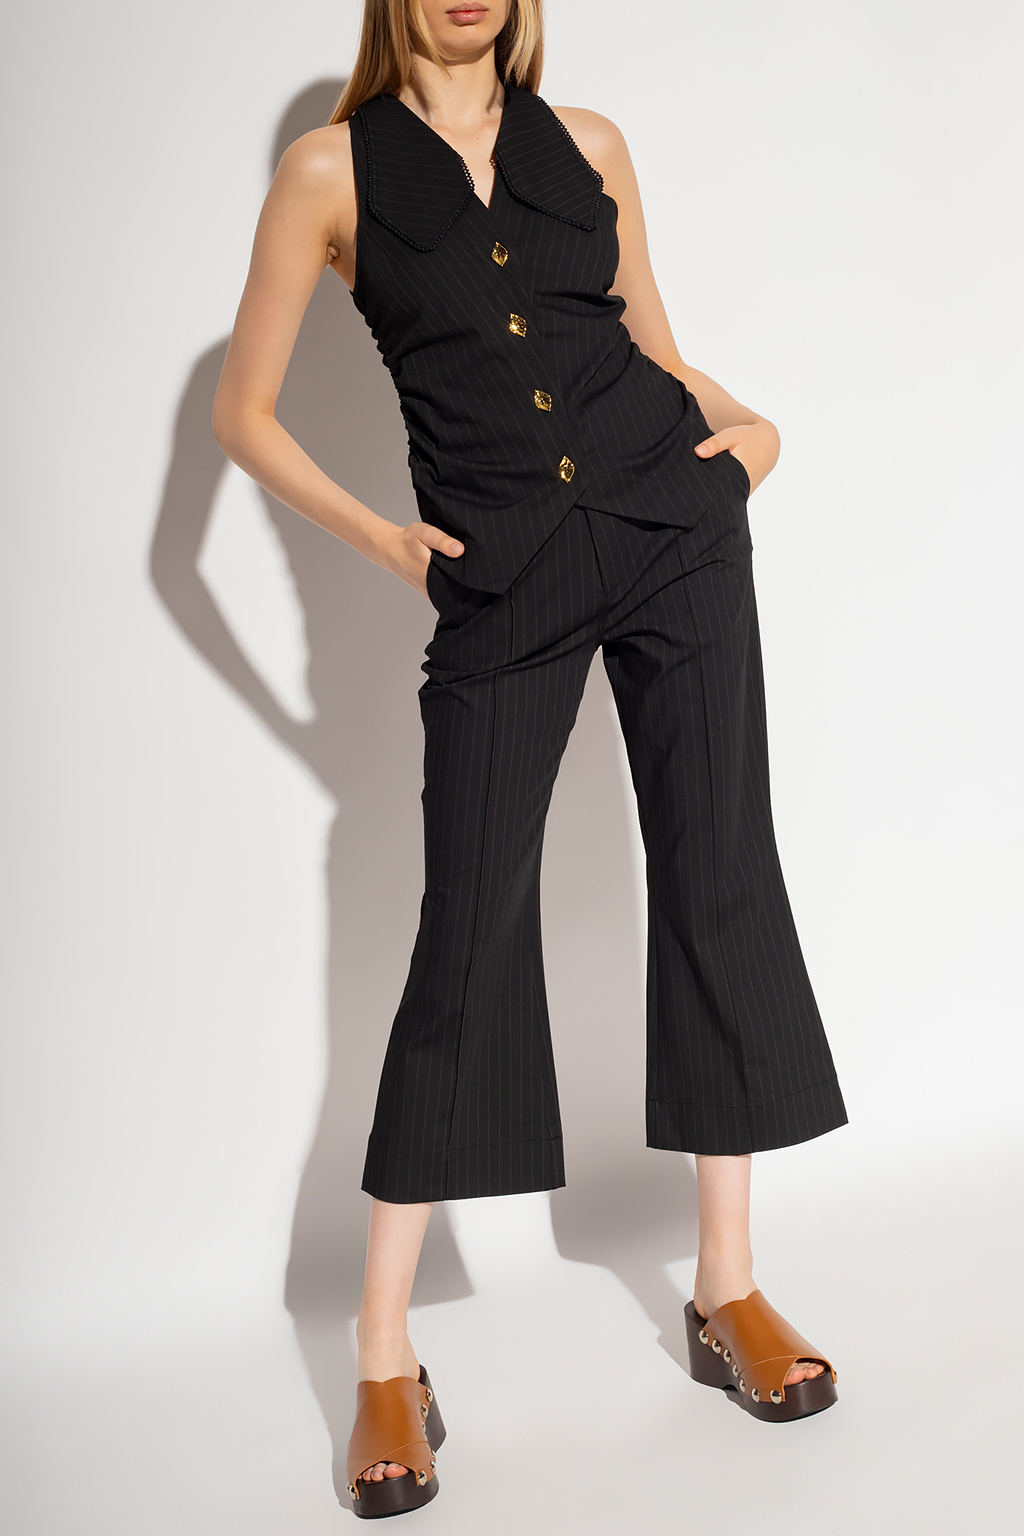 Ganni Ribbed trousers